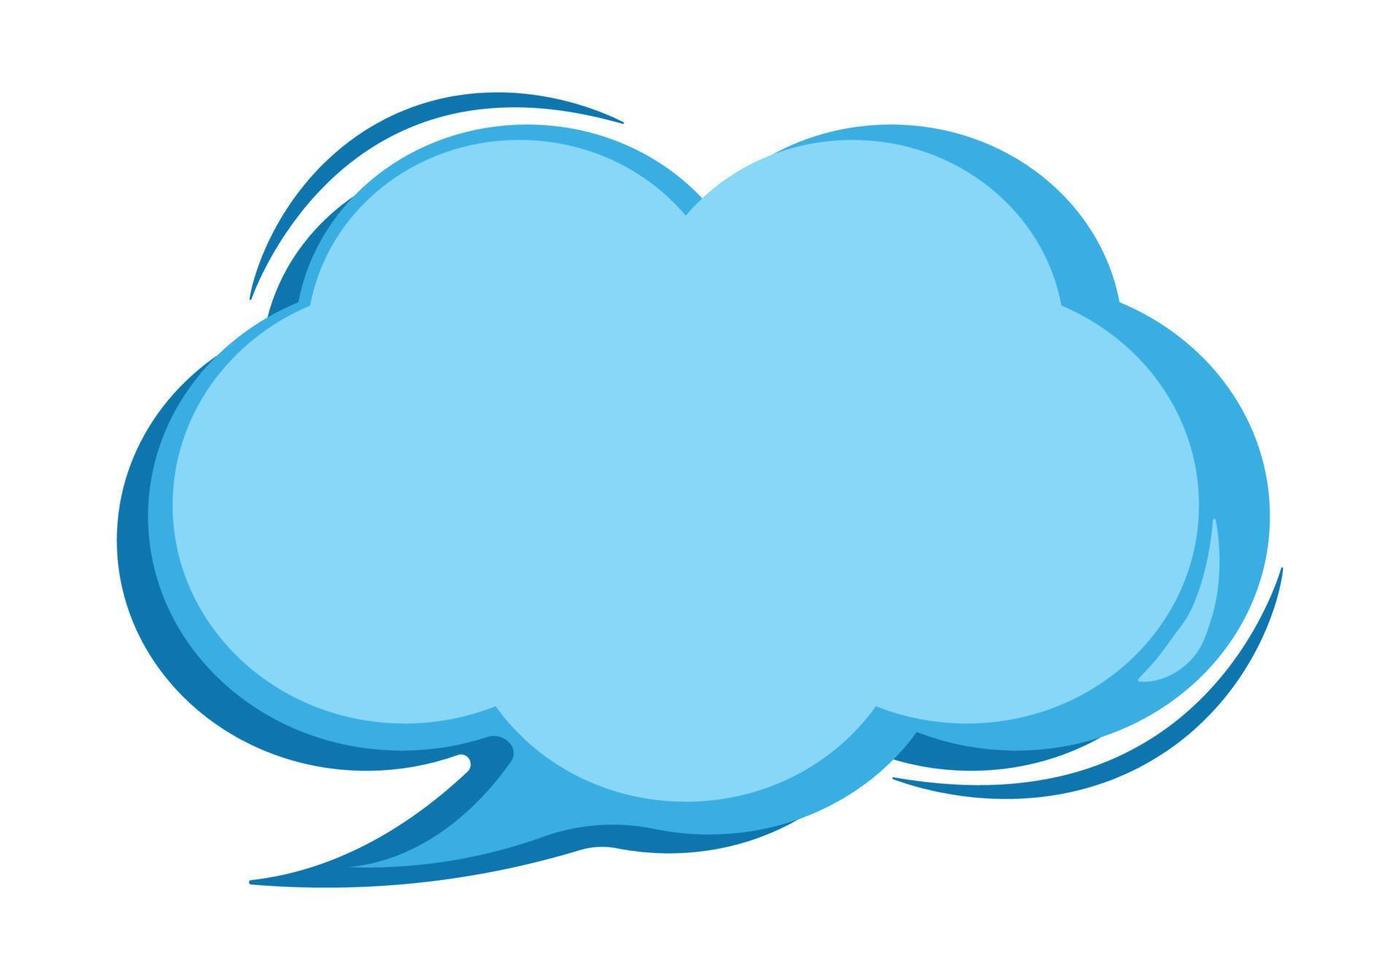 Cloud Speech Bubble Talk for Messages in Animated Cartoon Vector Image